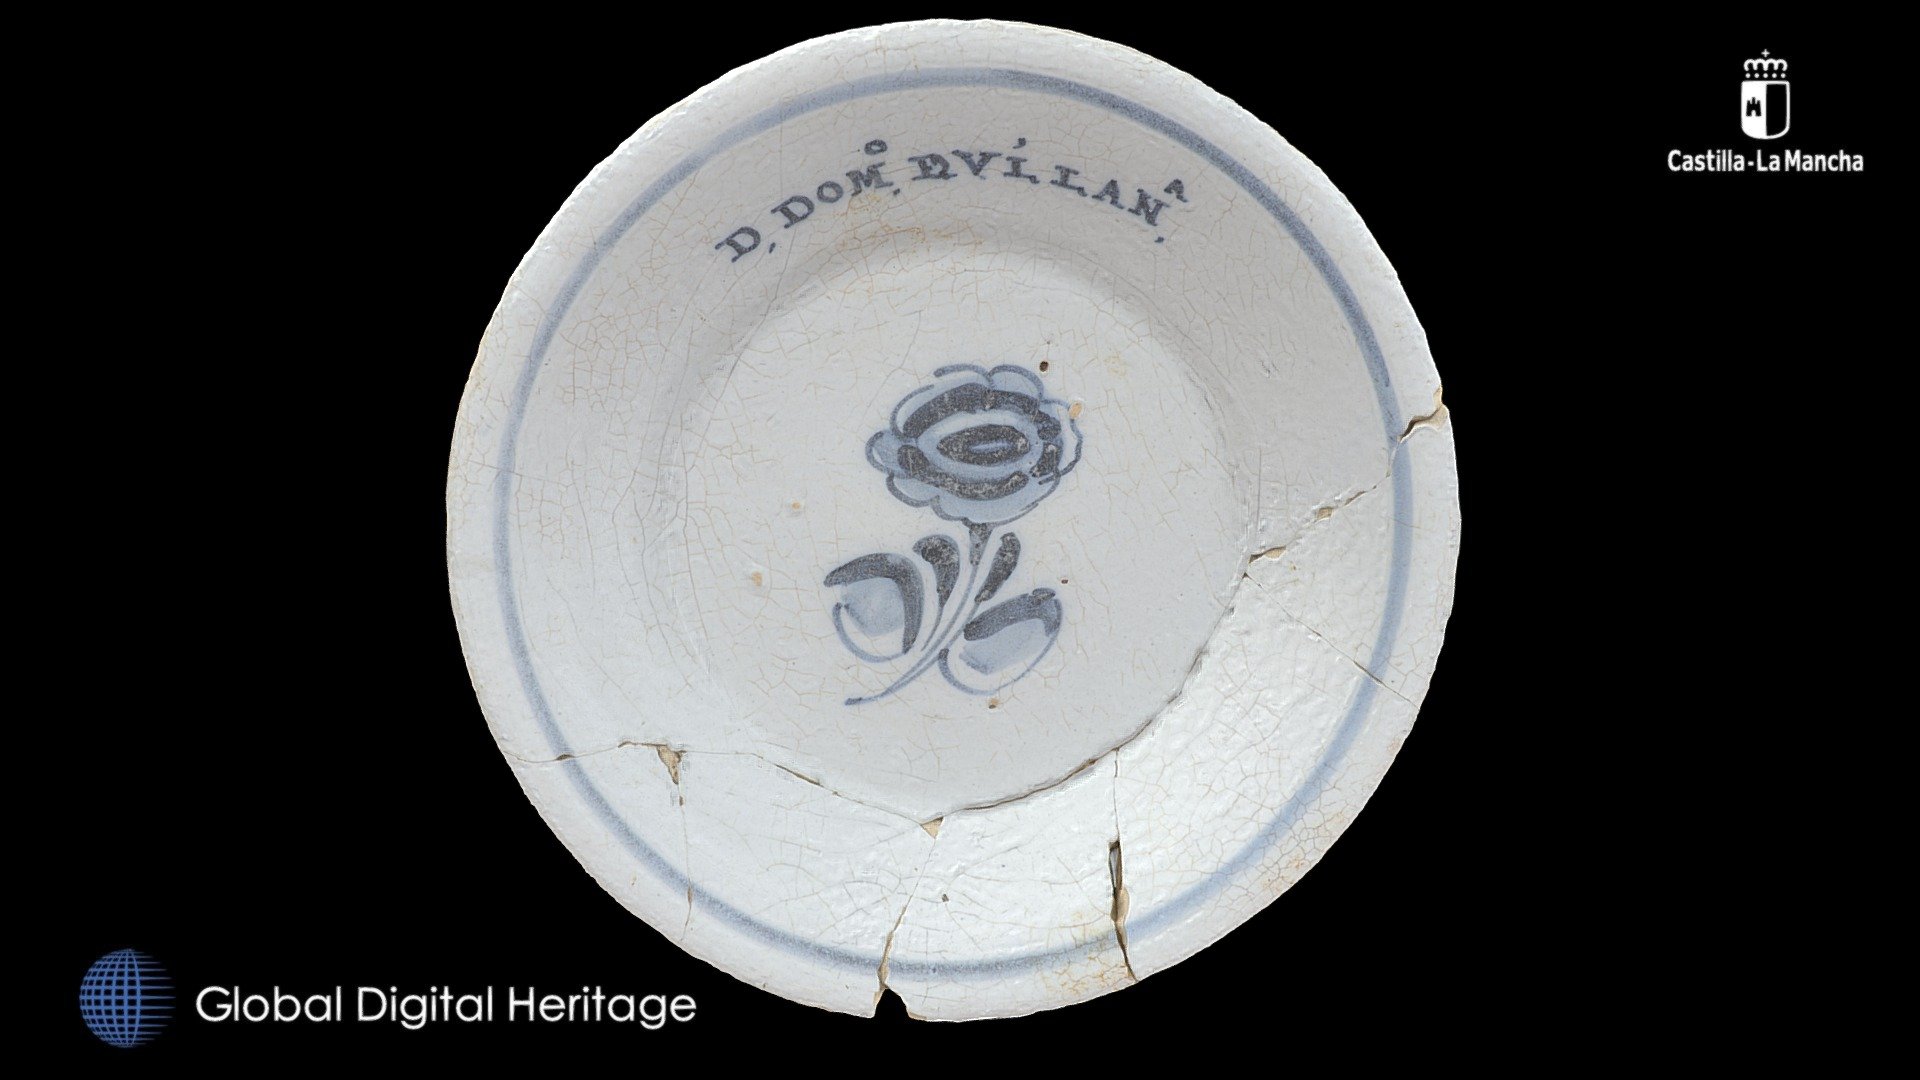 Talavera ceramic plate, decorated with flower and inscription from the  site of  María Cristina Street, Ciudad Real,  Castilla-La Mancha, Spain.  Early modern period. In the collection of the Ciudad Real Museum.  Catalog number DO001005. Processed in Reality Capture from 450 images. .

This work is part of the collaboration agreement signed in 2020 between the Junta de Comunidades de Castilla-La Mancha and Global Digital Heritage for the digitization of the Cultural Heritage of Castilla-La Mancha region. We want to publicly thank the collaboration of the Museum of Ciudad Real, especially by its director José Ignacio de la Torre 3d model